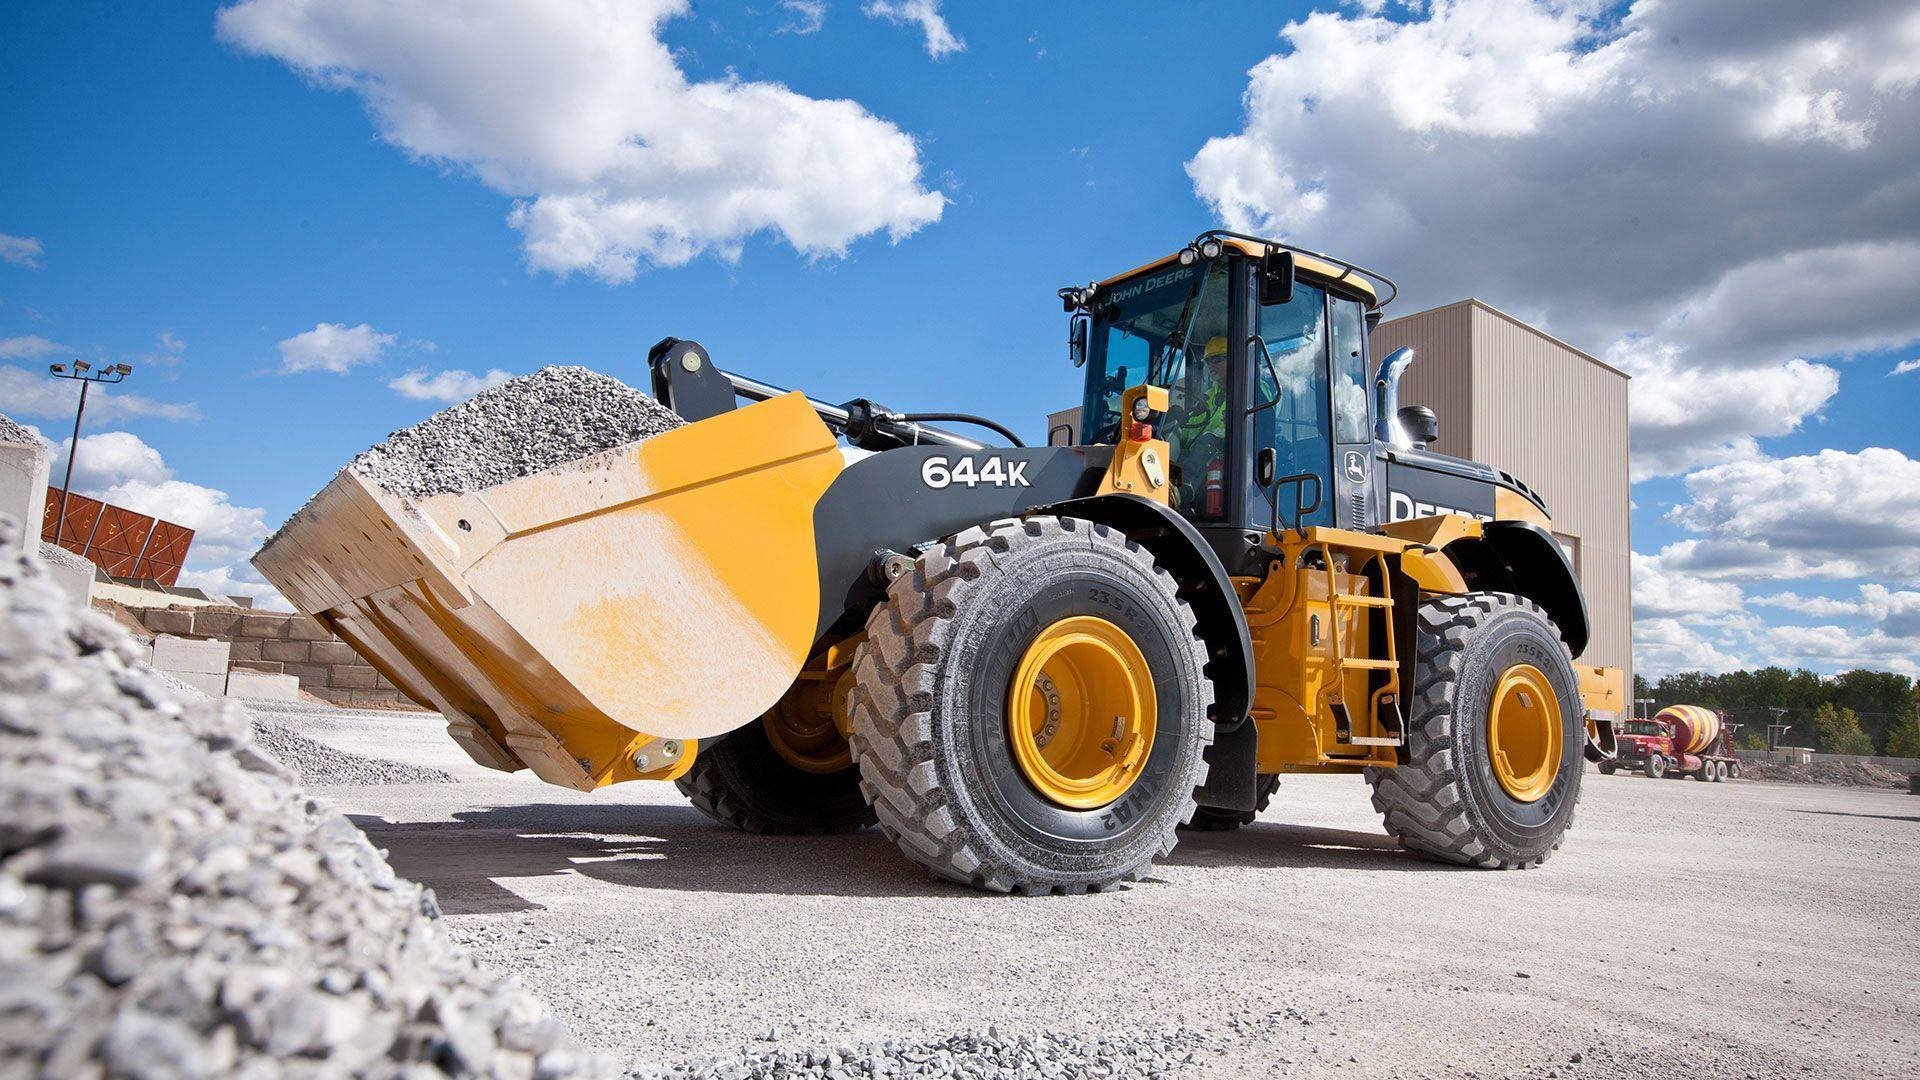 Large Wheel Loader In A Construction Background